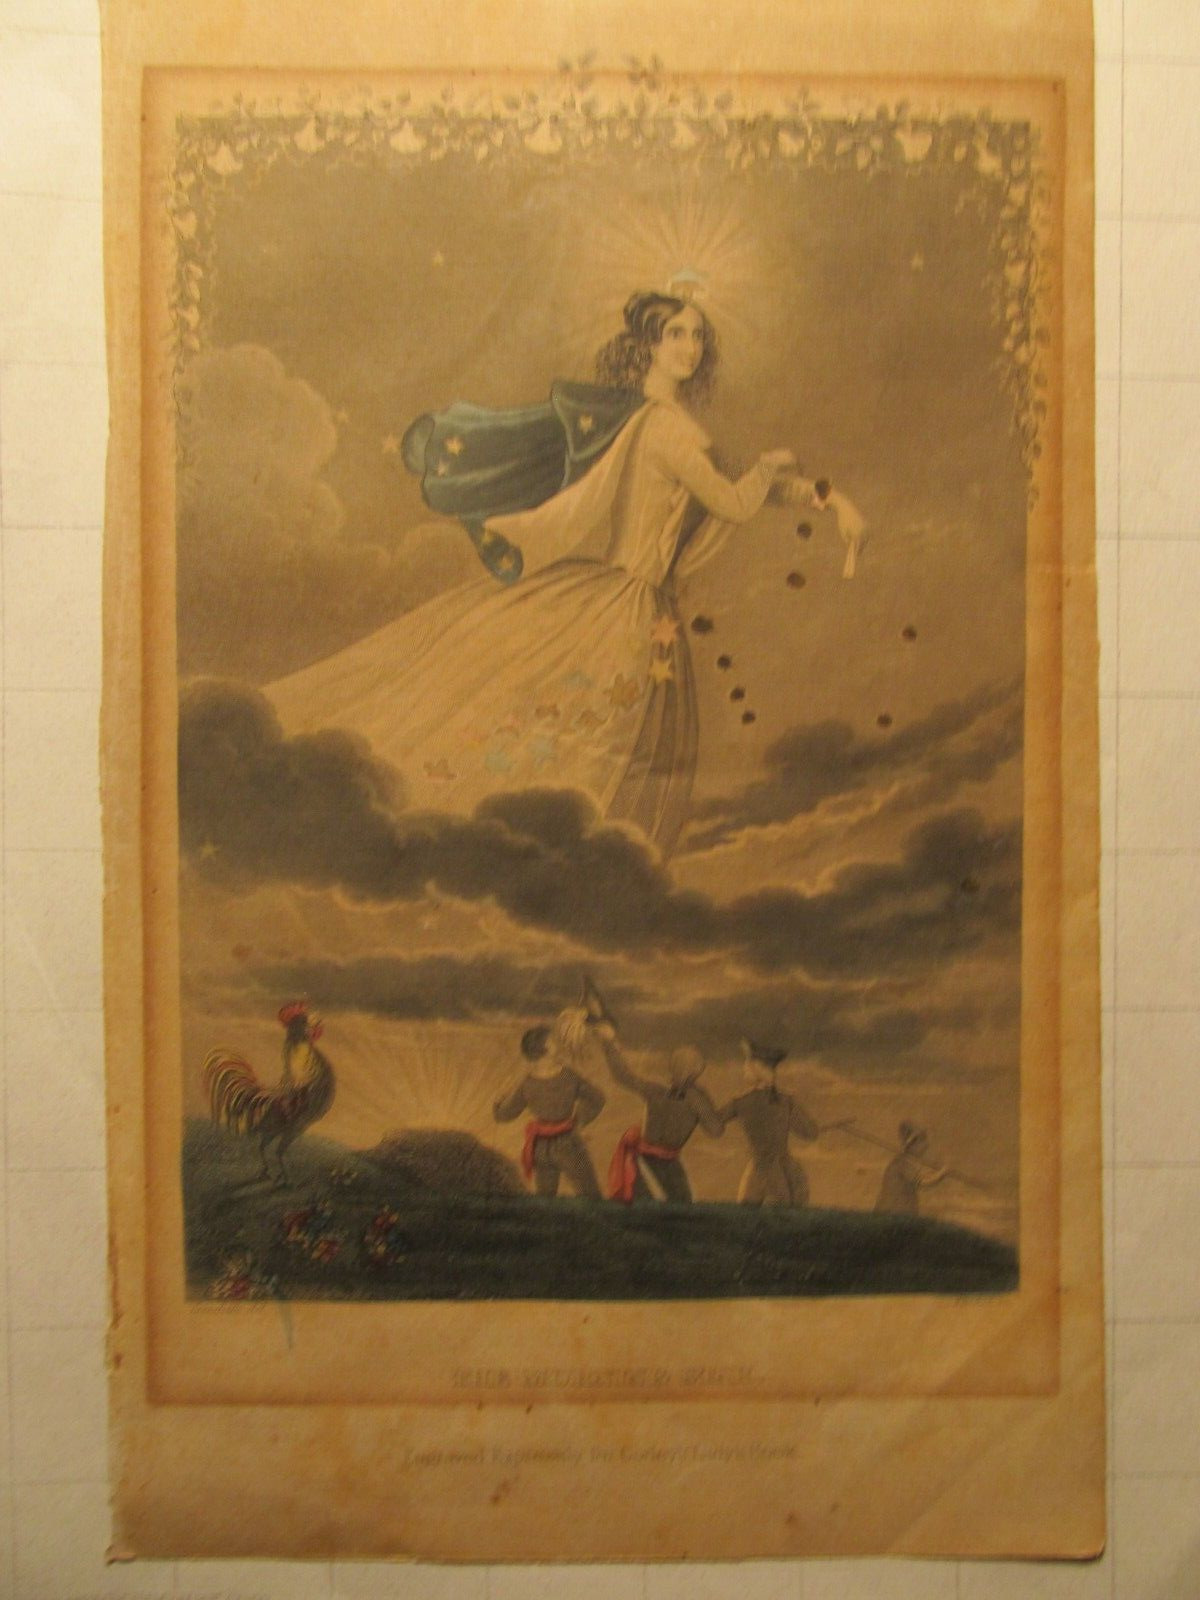 Antique Hand-tinted Engraving_The Morning Star_Godey's Lady's Book_ca 1850